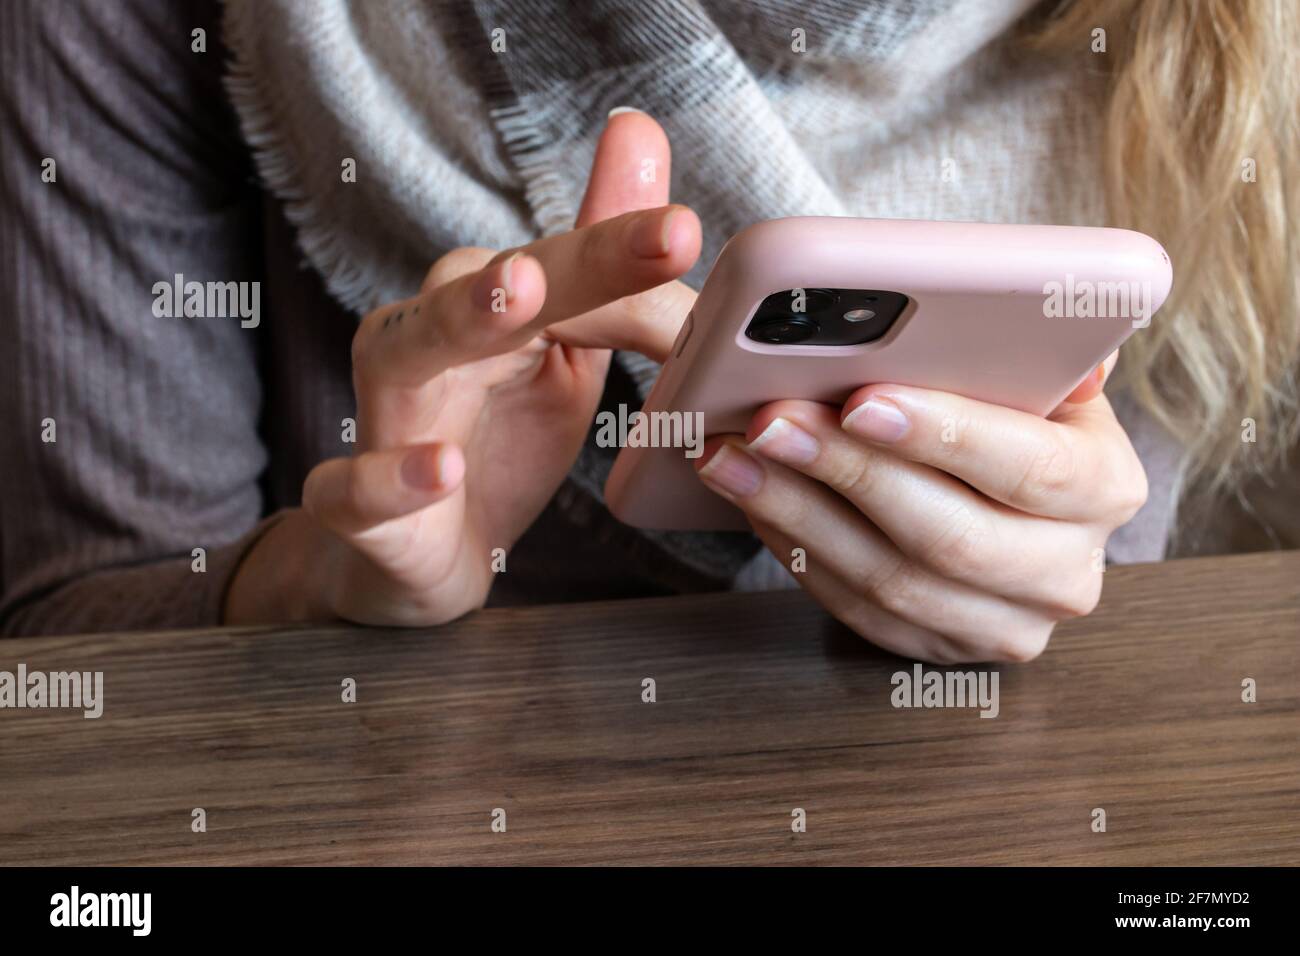 Woman with a finger tattoo and blonde hair scrolling on her pink smartphone rapidly in a cafe, February 2021. Stock Photo